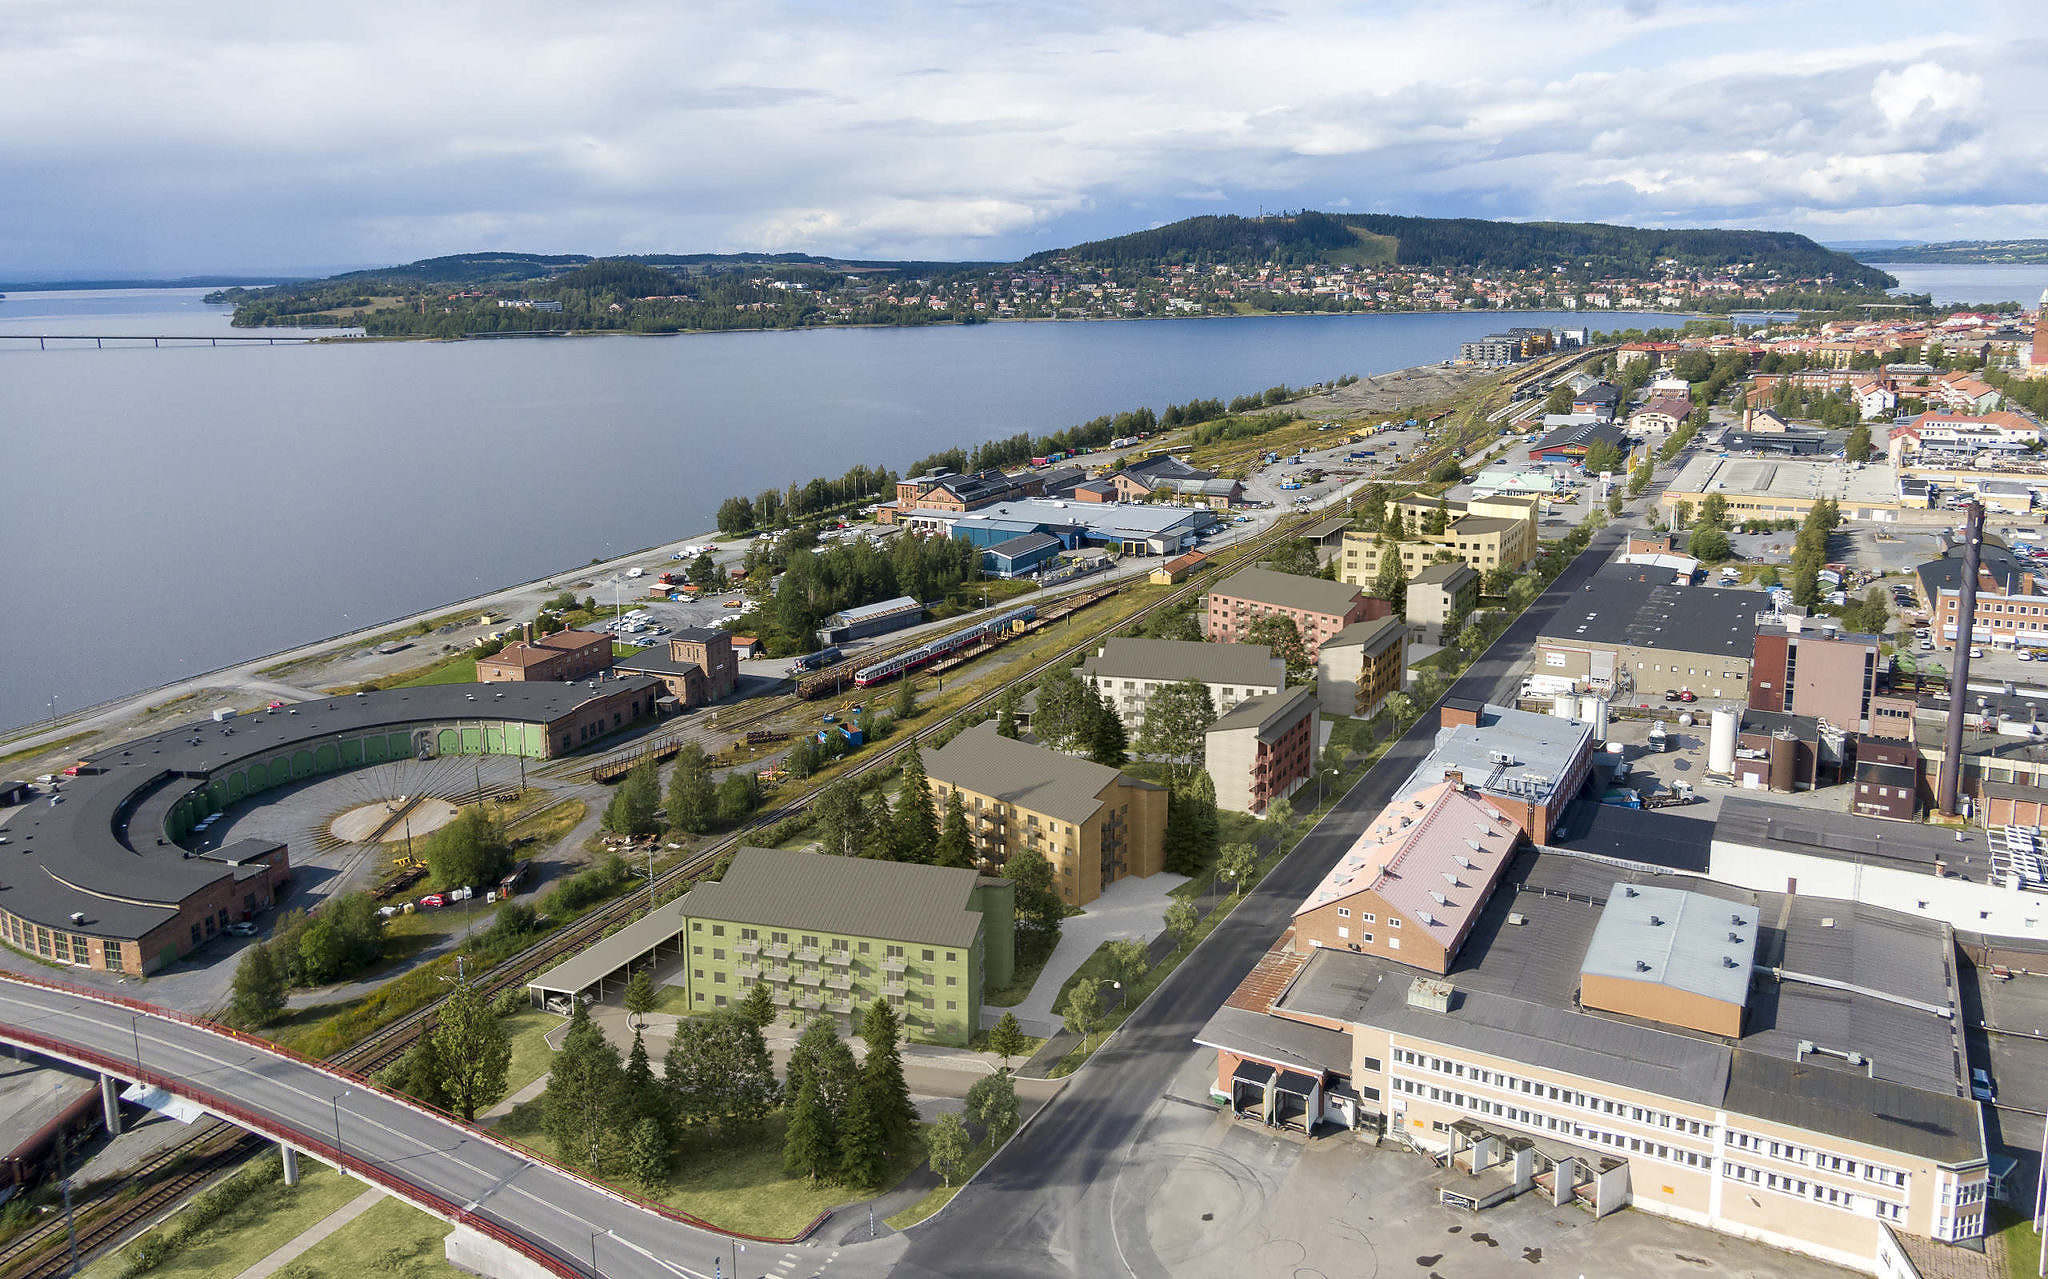 Aerial view of Strandblick in Östersund with residential buildings, forest and water.